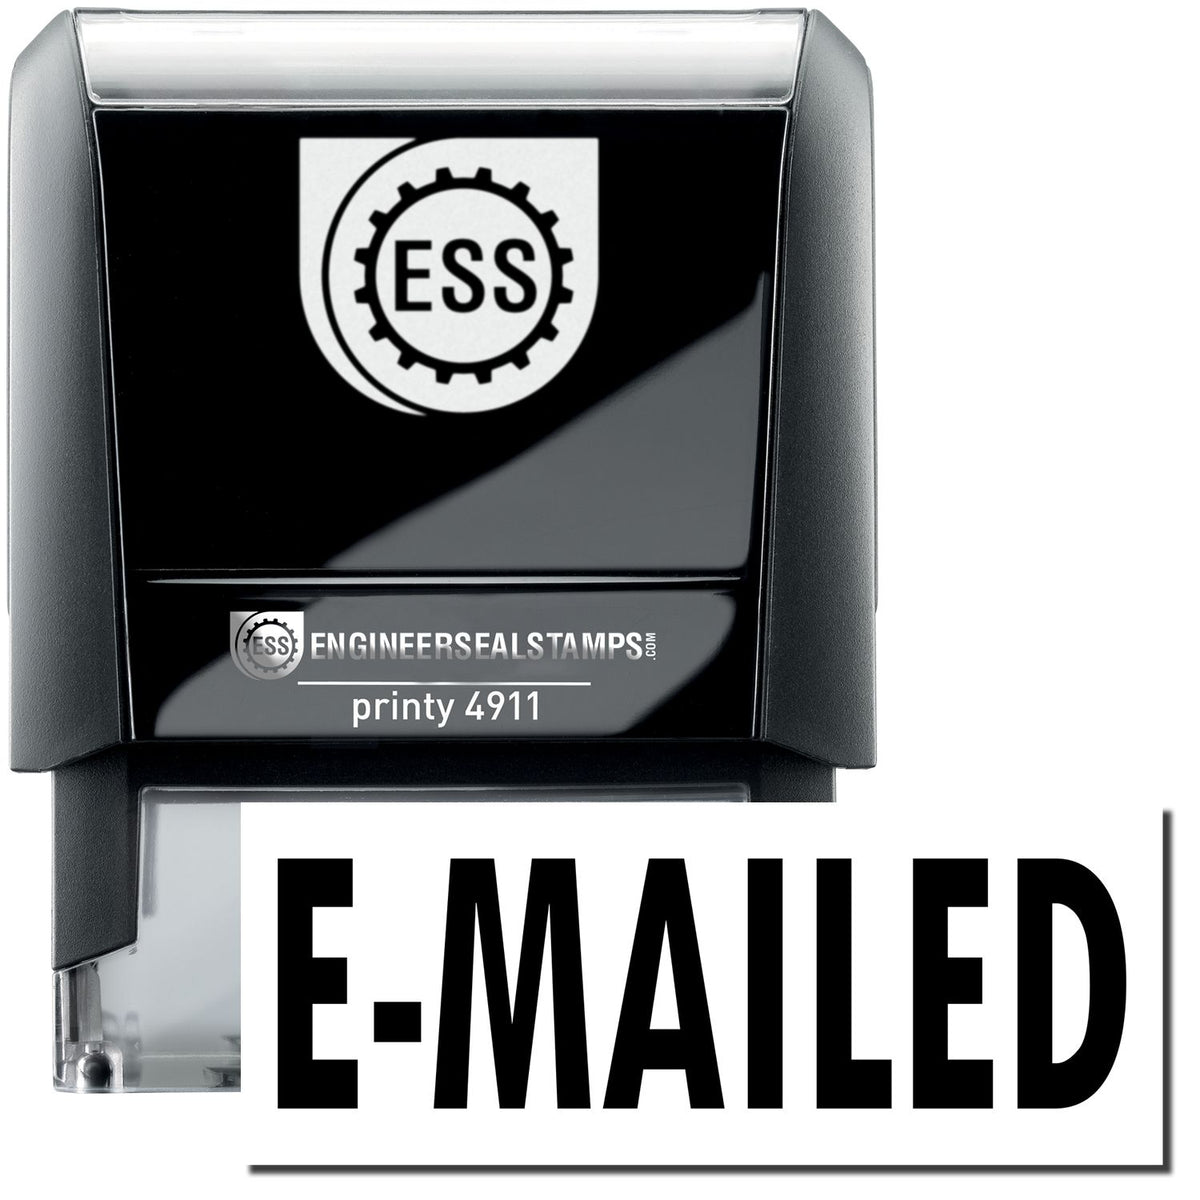 A self-inking stamp with a stamped image showing how the text &quot;E-MAILED&quot; is displayed after stamping.